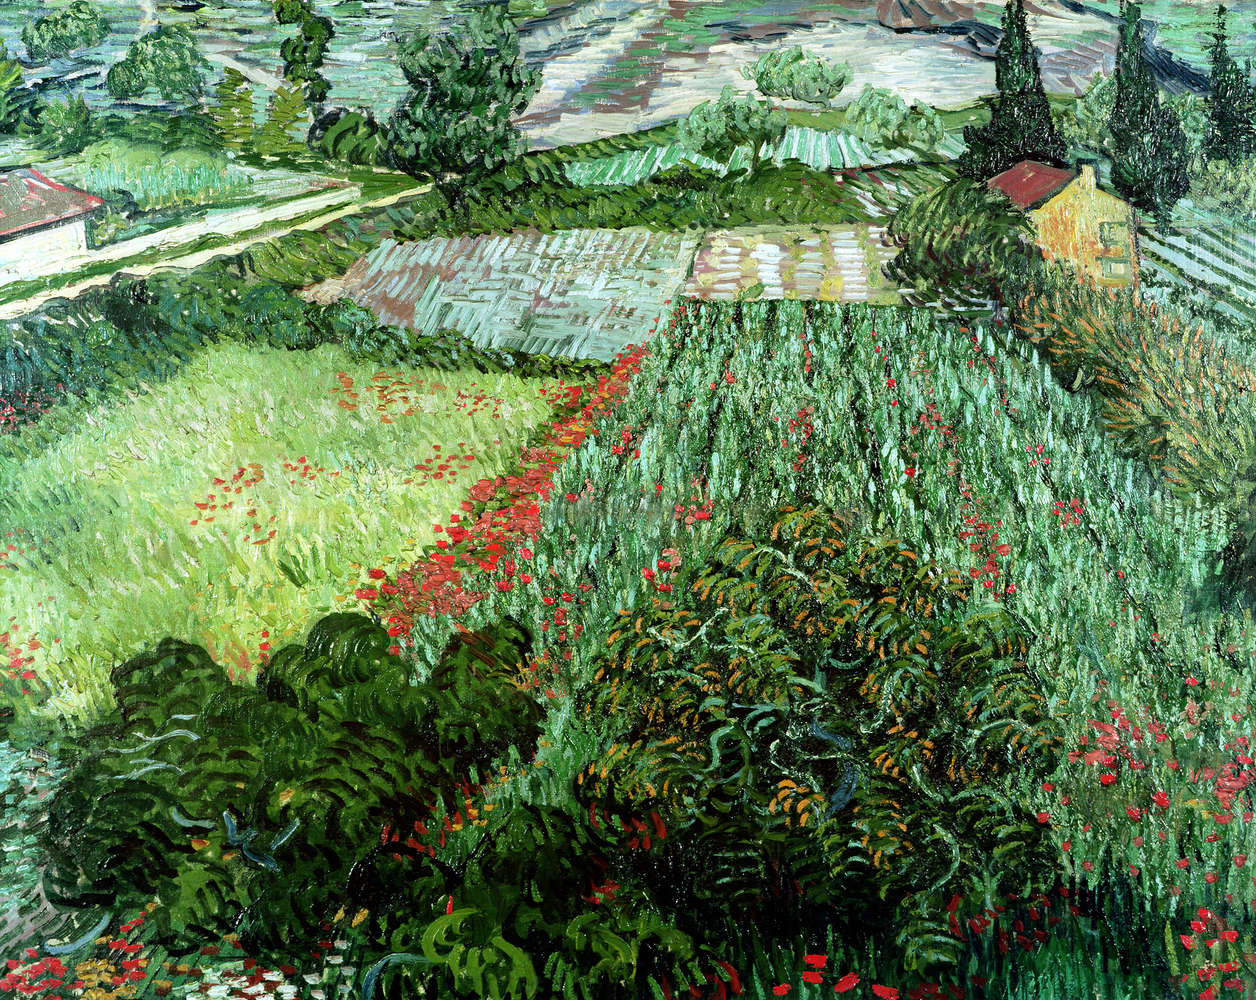             Photo wallpaper "Field with poppies" by Vincent van Gogh
        